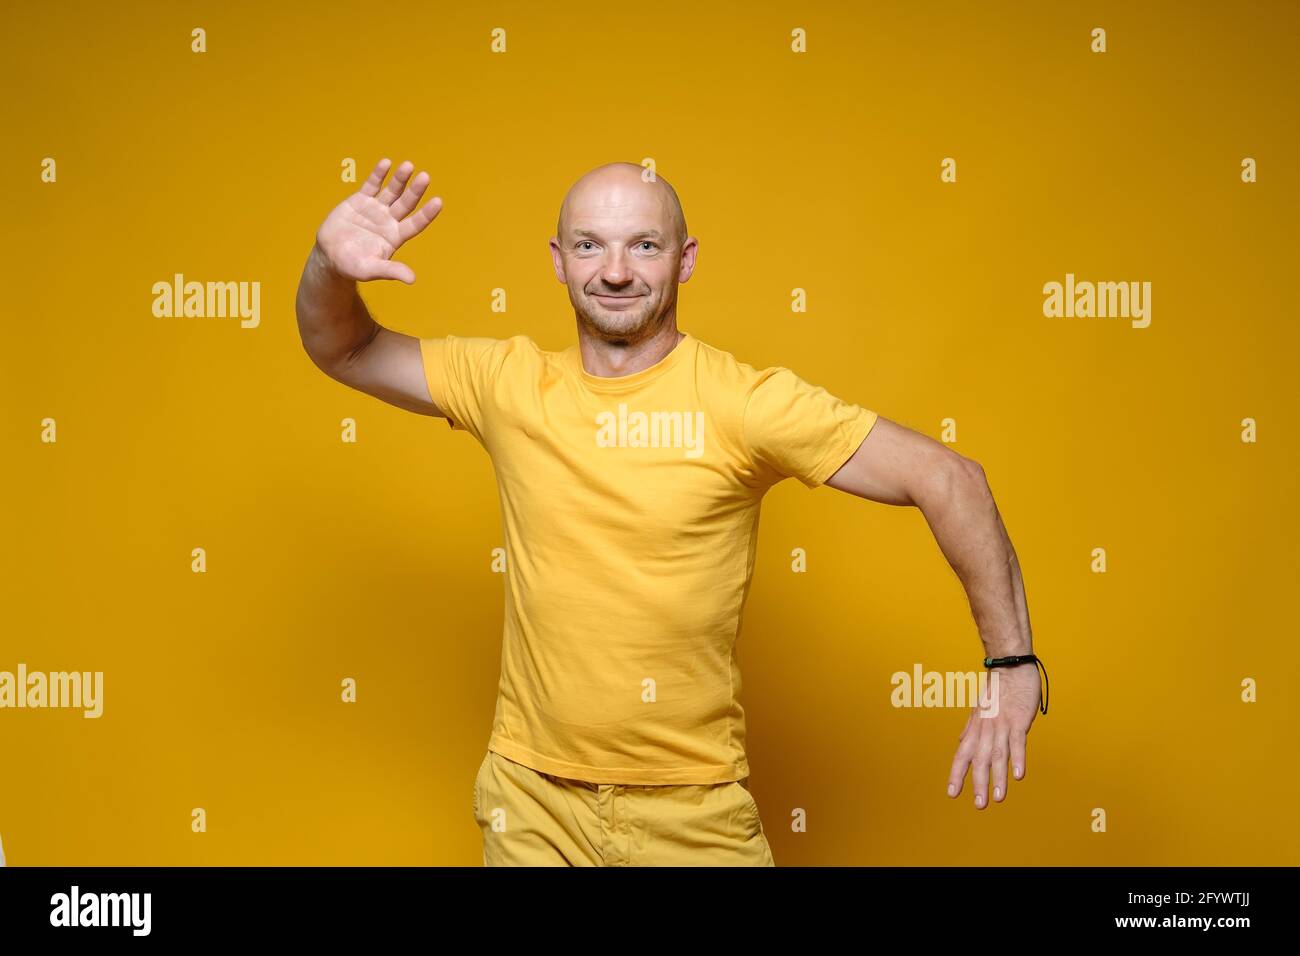 Funny bald, Caucasian man in yellow clothes stands with a bizarre pose and looks at the camera. Bright background. Stock Photo